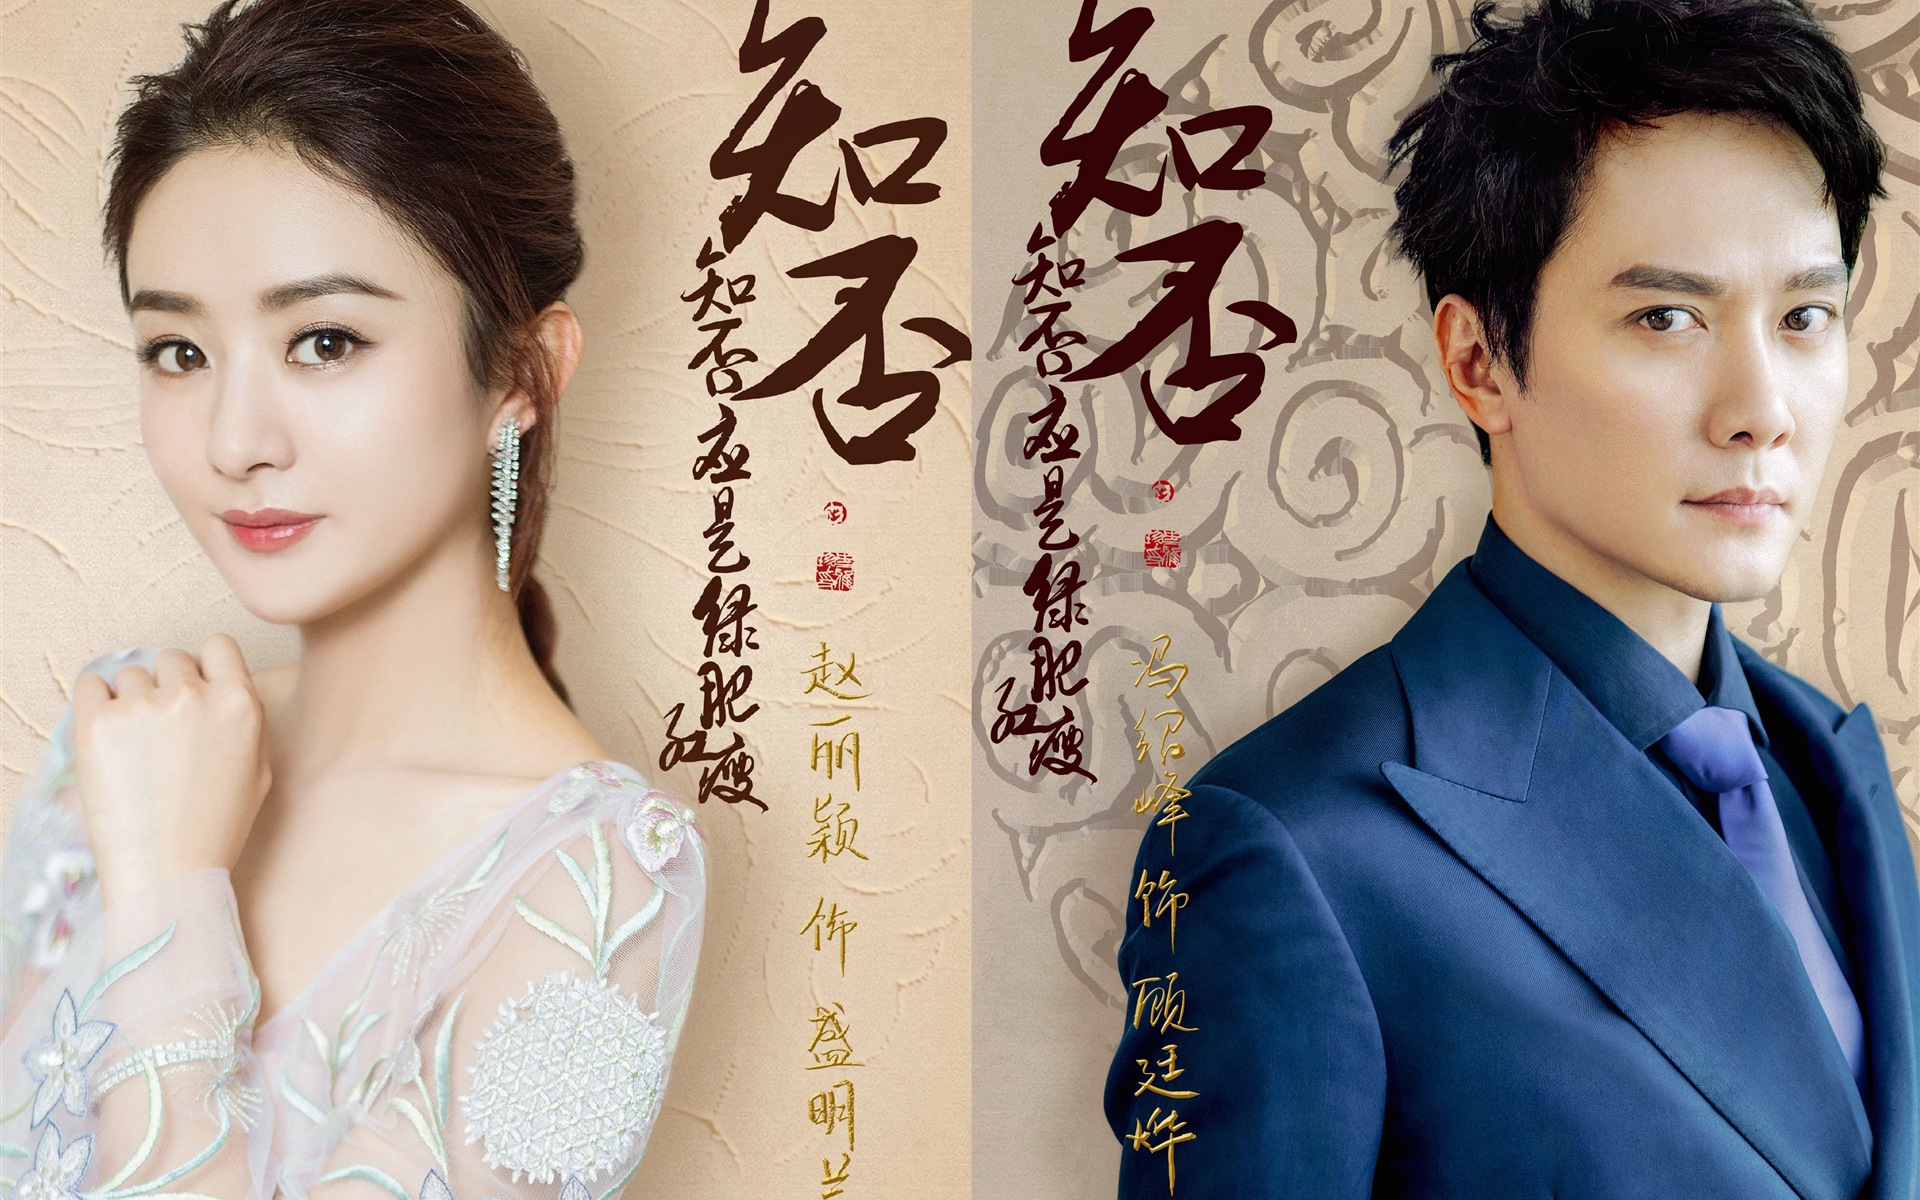 The Story Of MingLan, TV series HD wallpapers #46 - 1920x1200